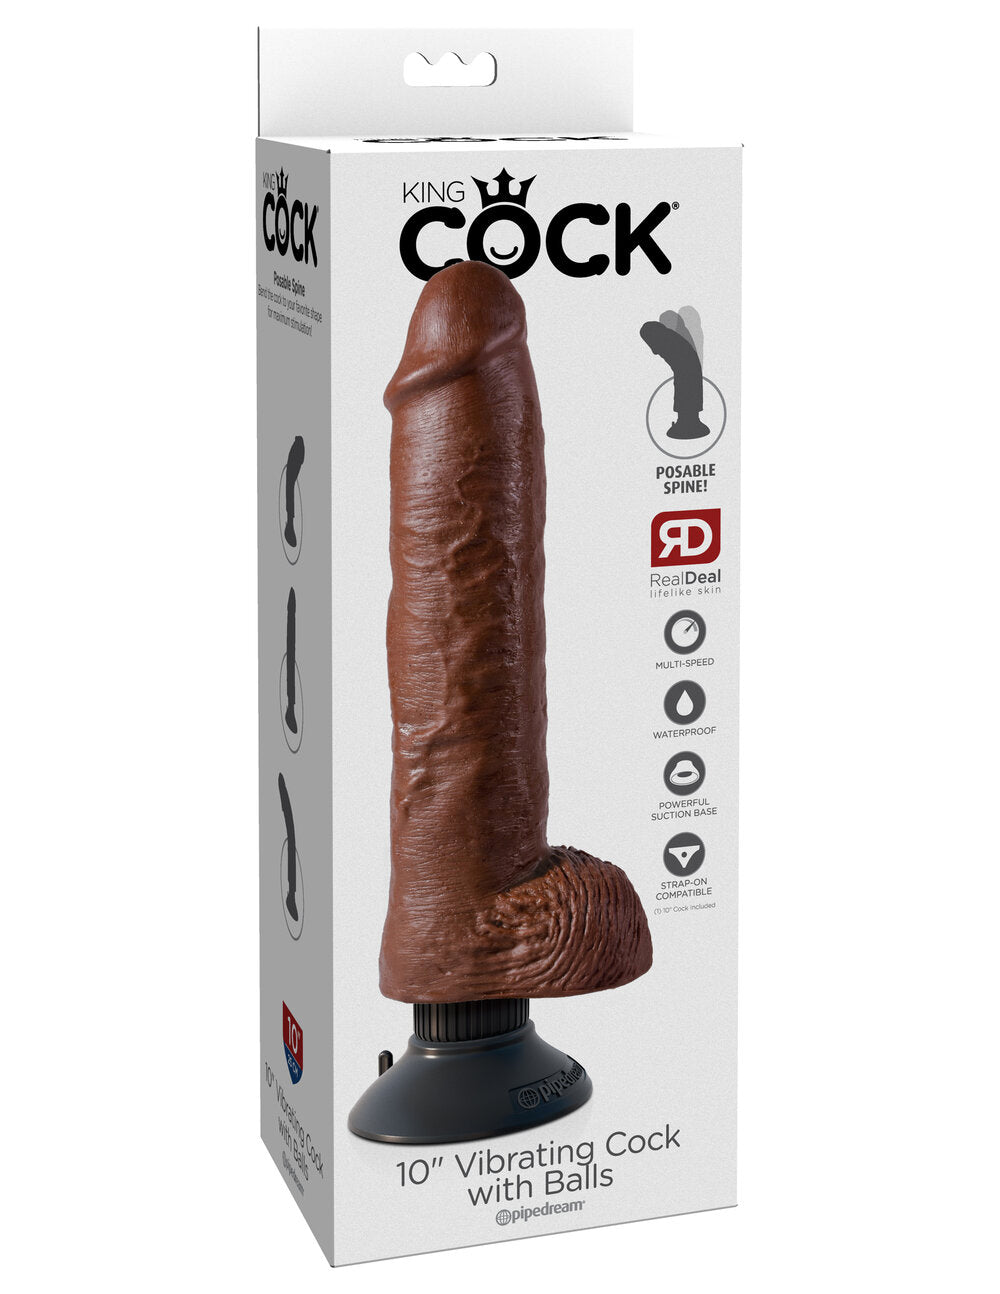 King Cock 10in Vibrating Cock w/Balls